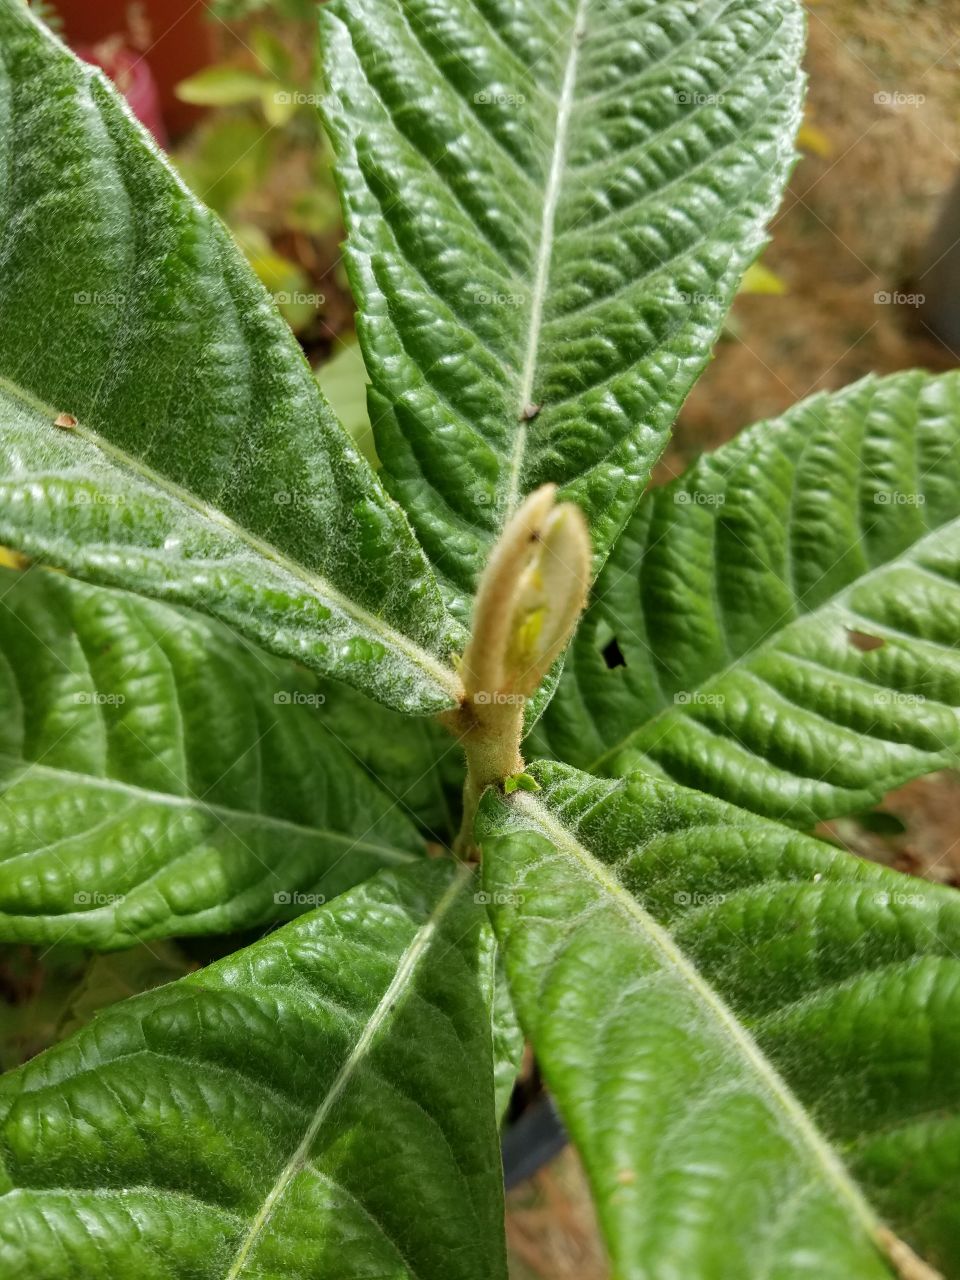 small leaf growing